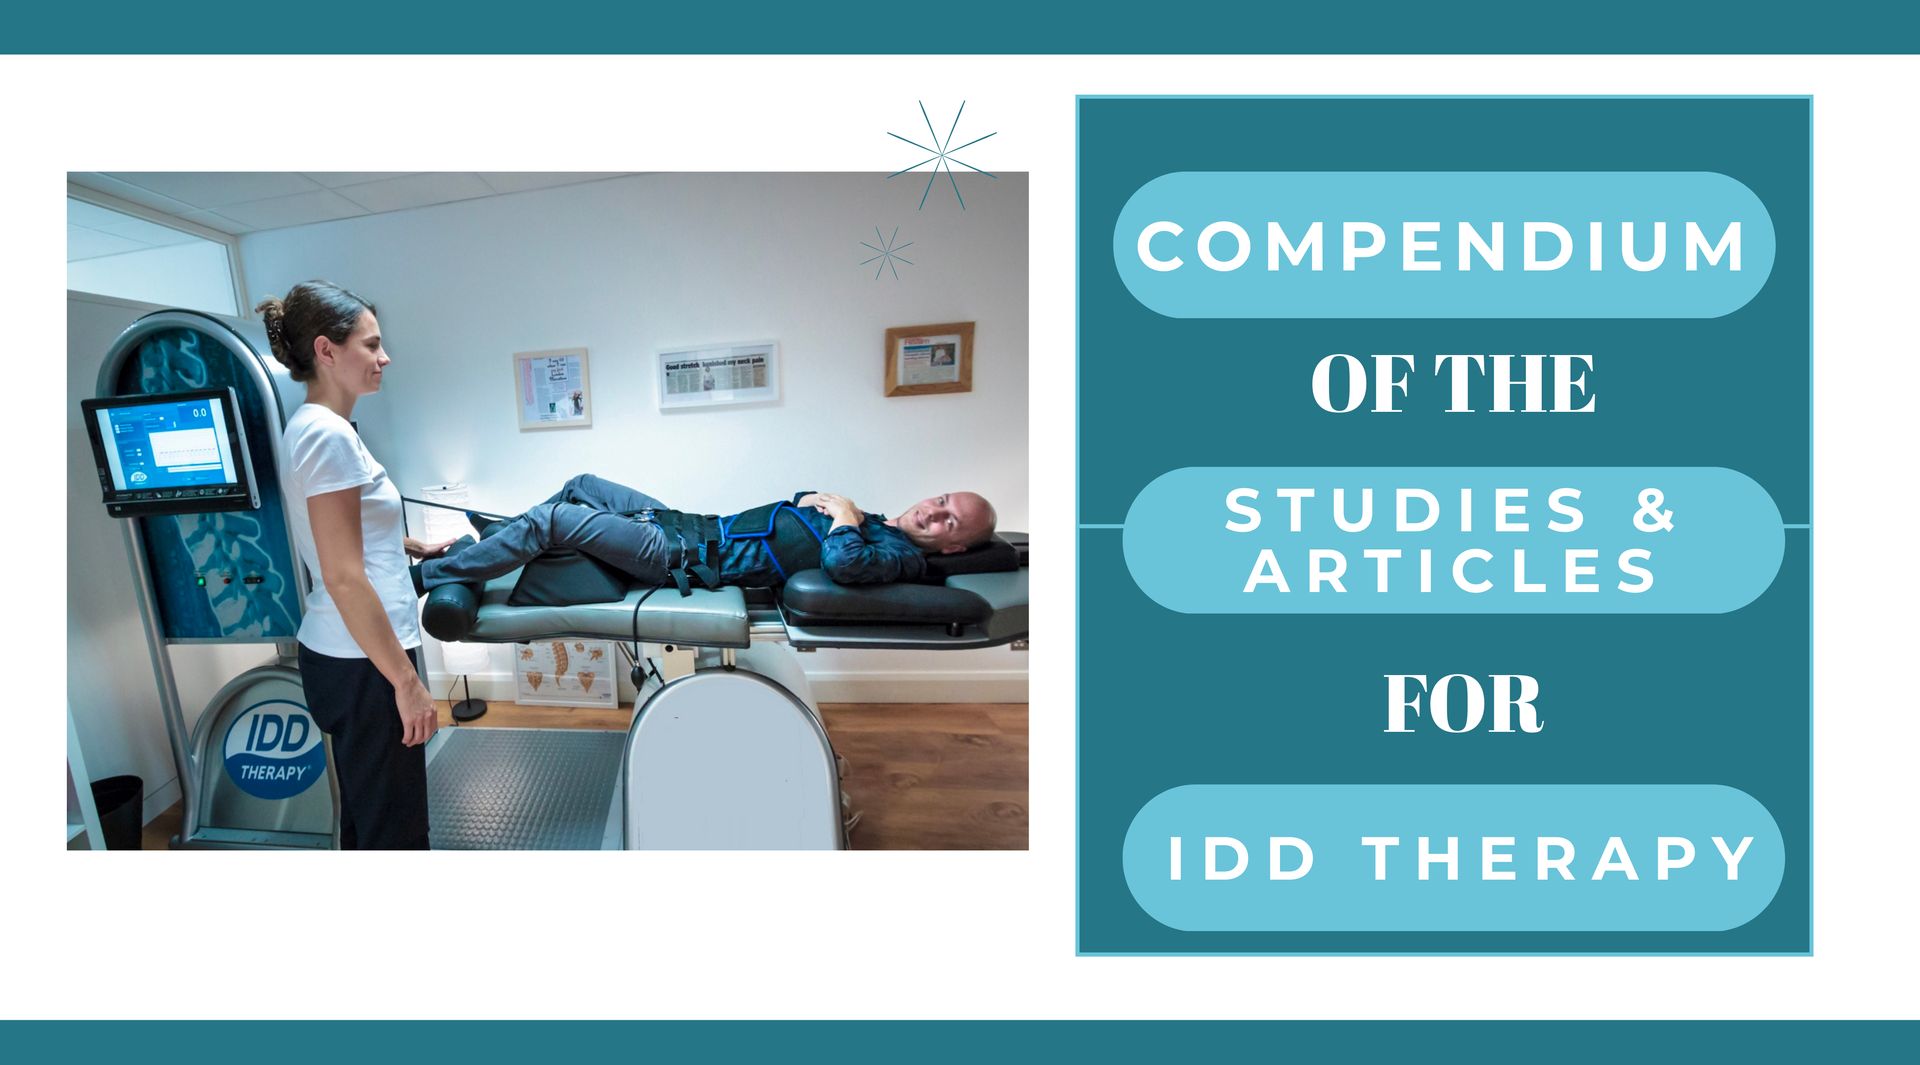 Compendium of the Studies and Articles for IDD Therapy